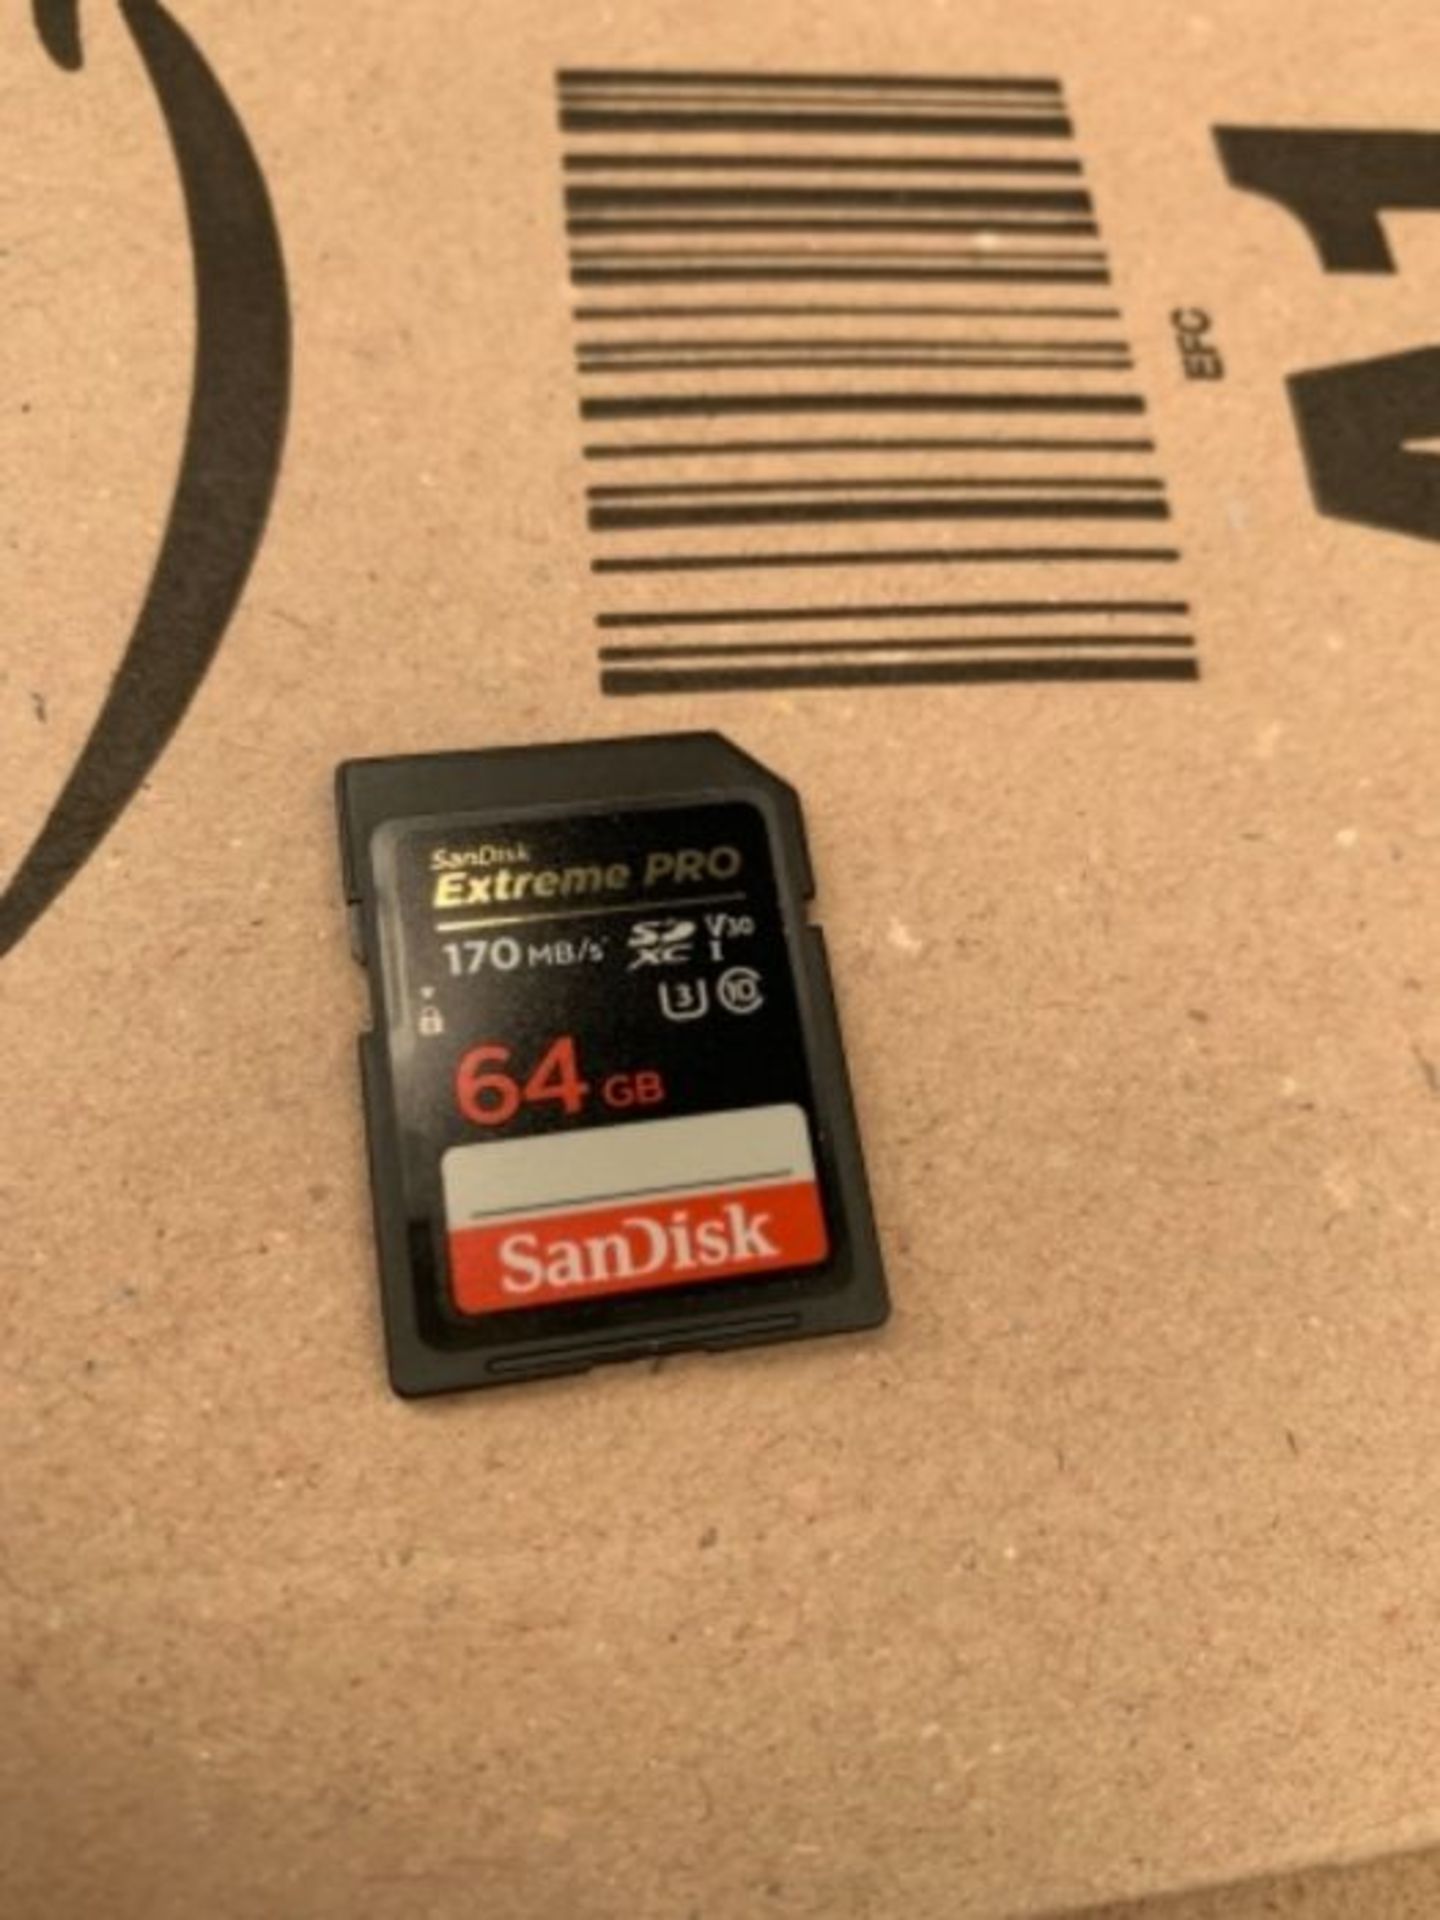 SanDisk Extreme PRO 64GB SDXC Memory Card up to 170MB/s, UHS-1, Class 10, U3, V30 - Image 2 of 2